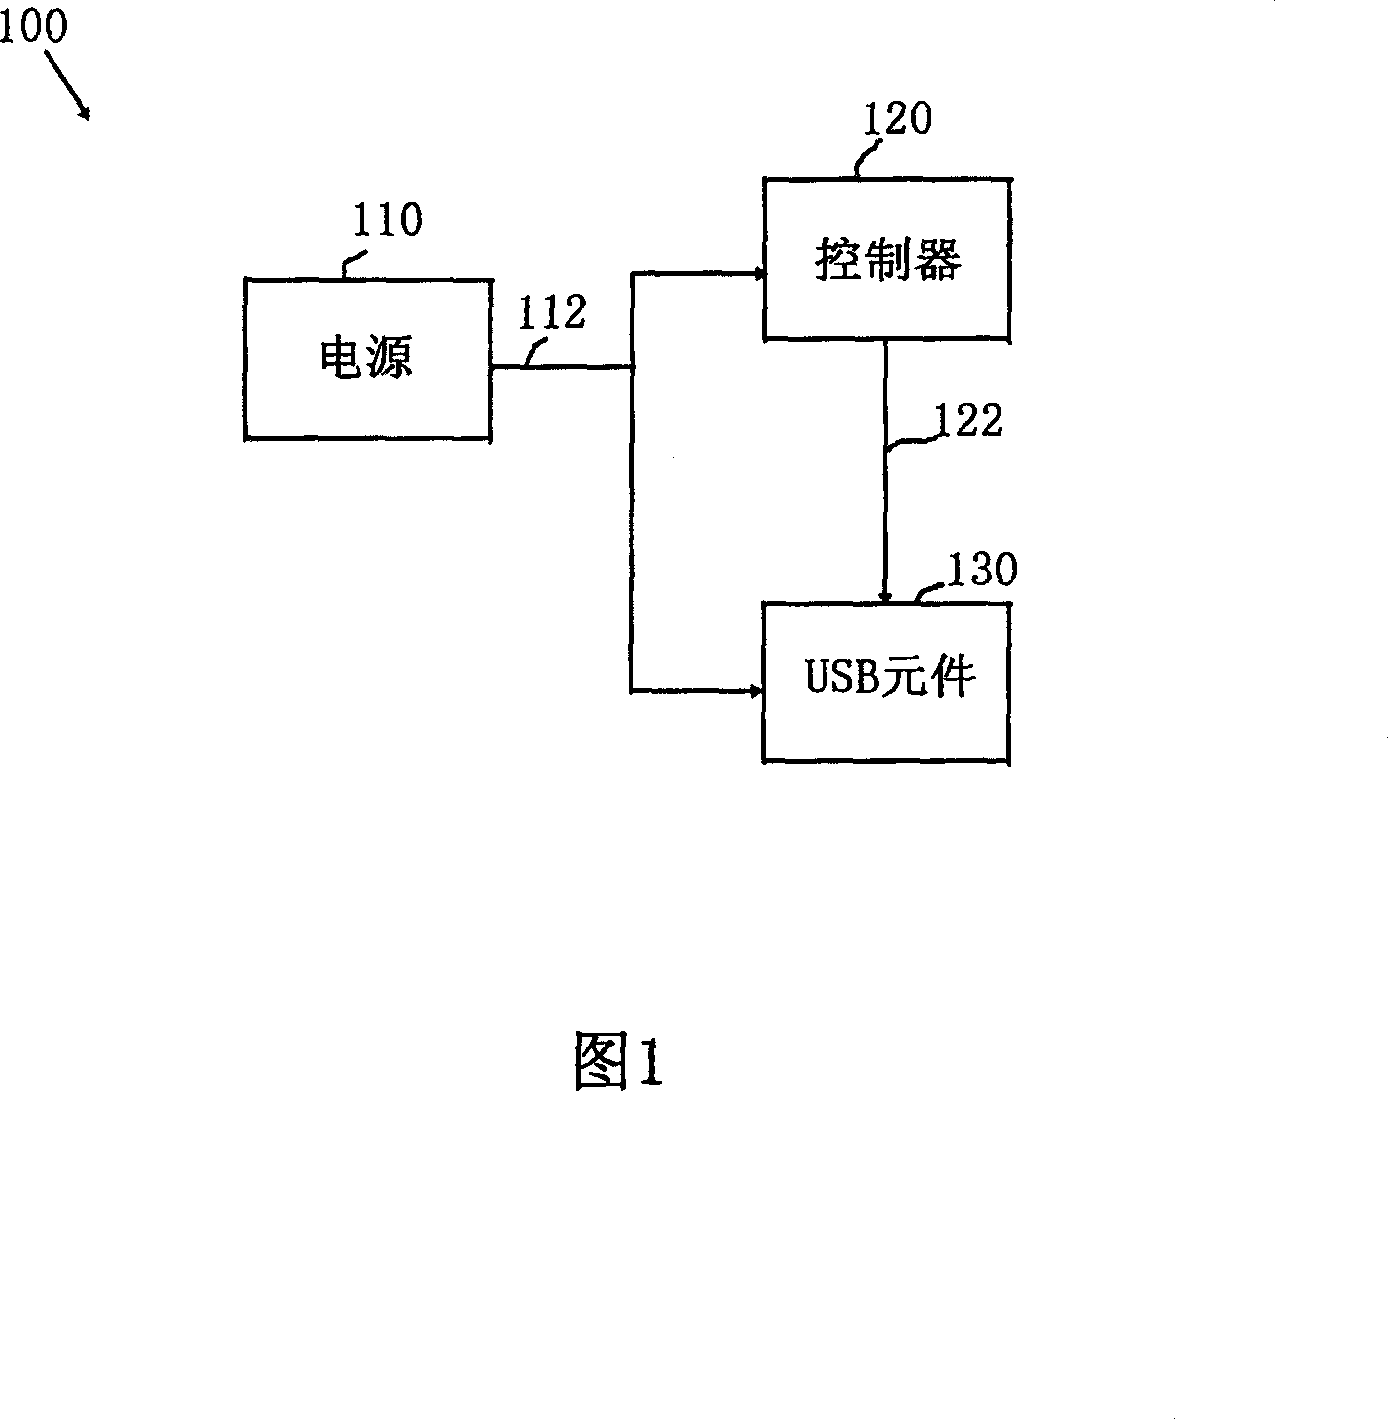 Power-saving system and method used for equipment based on universal series bus